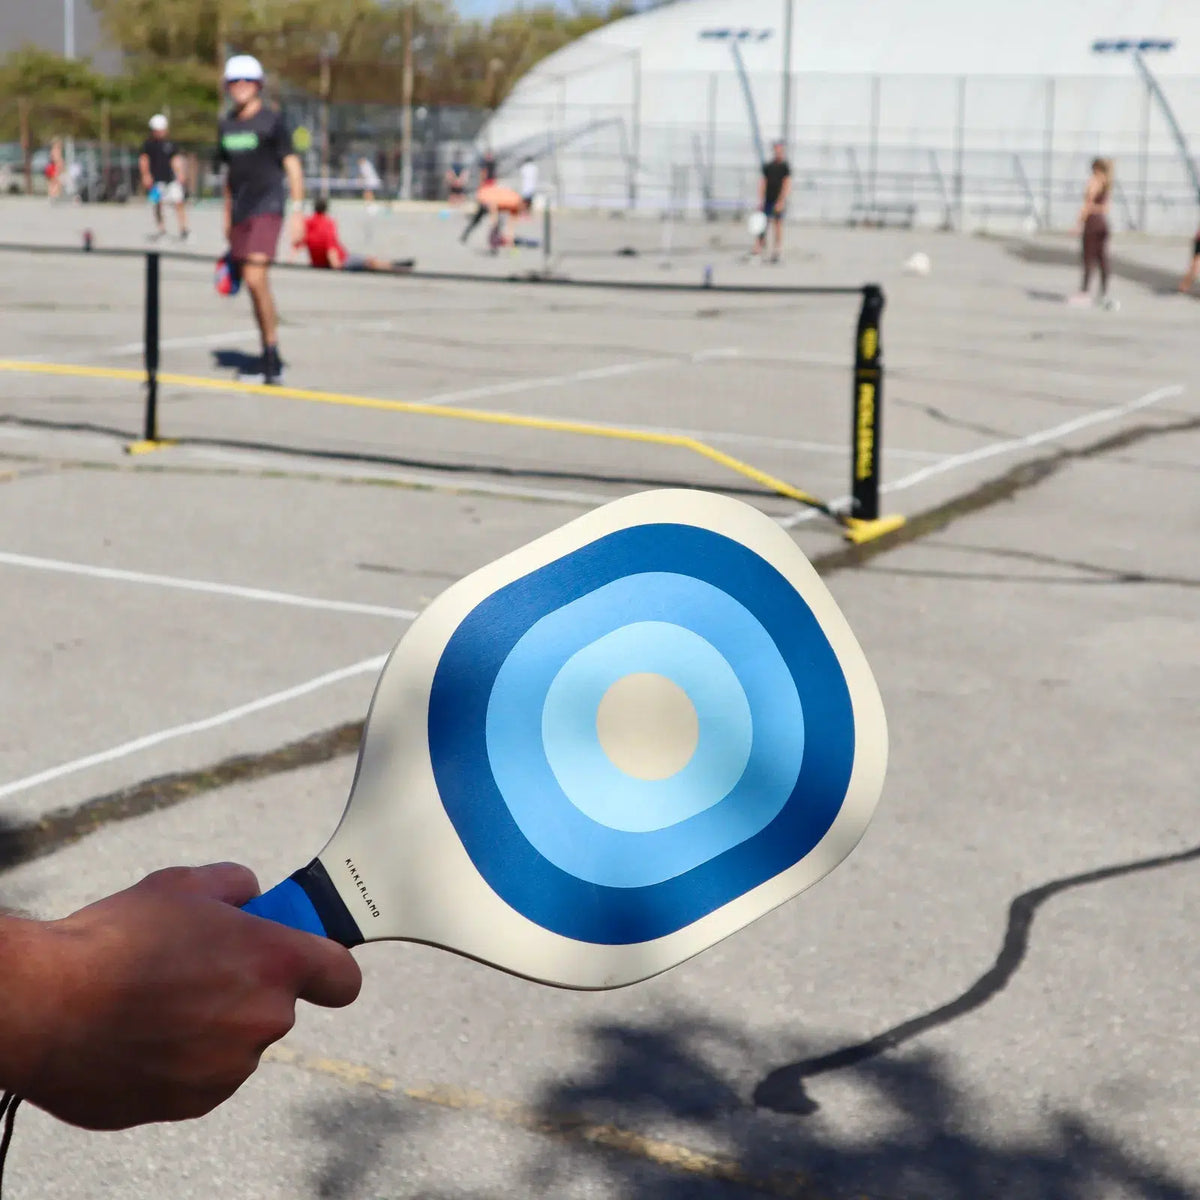 Front view of a court where a person is playing pickleball with the blue paddle from the Pickleball set in their hand.